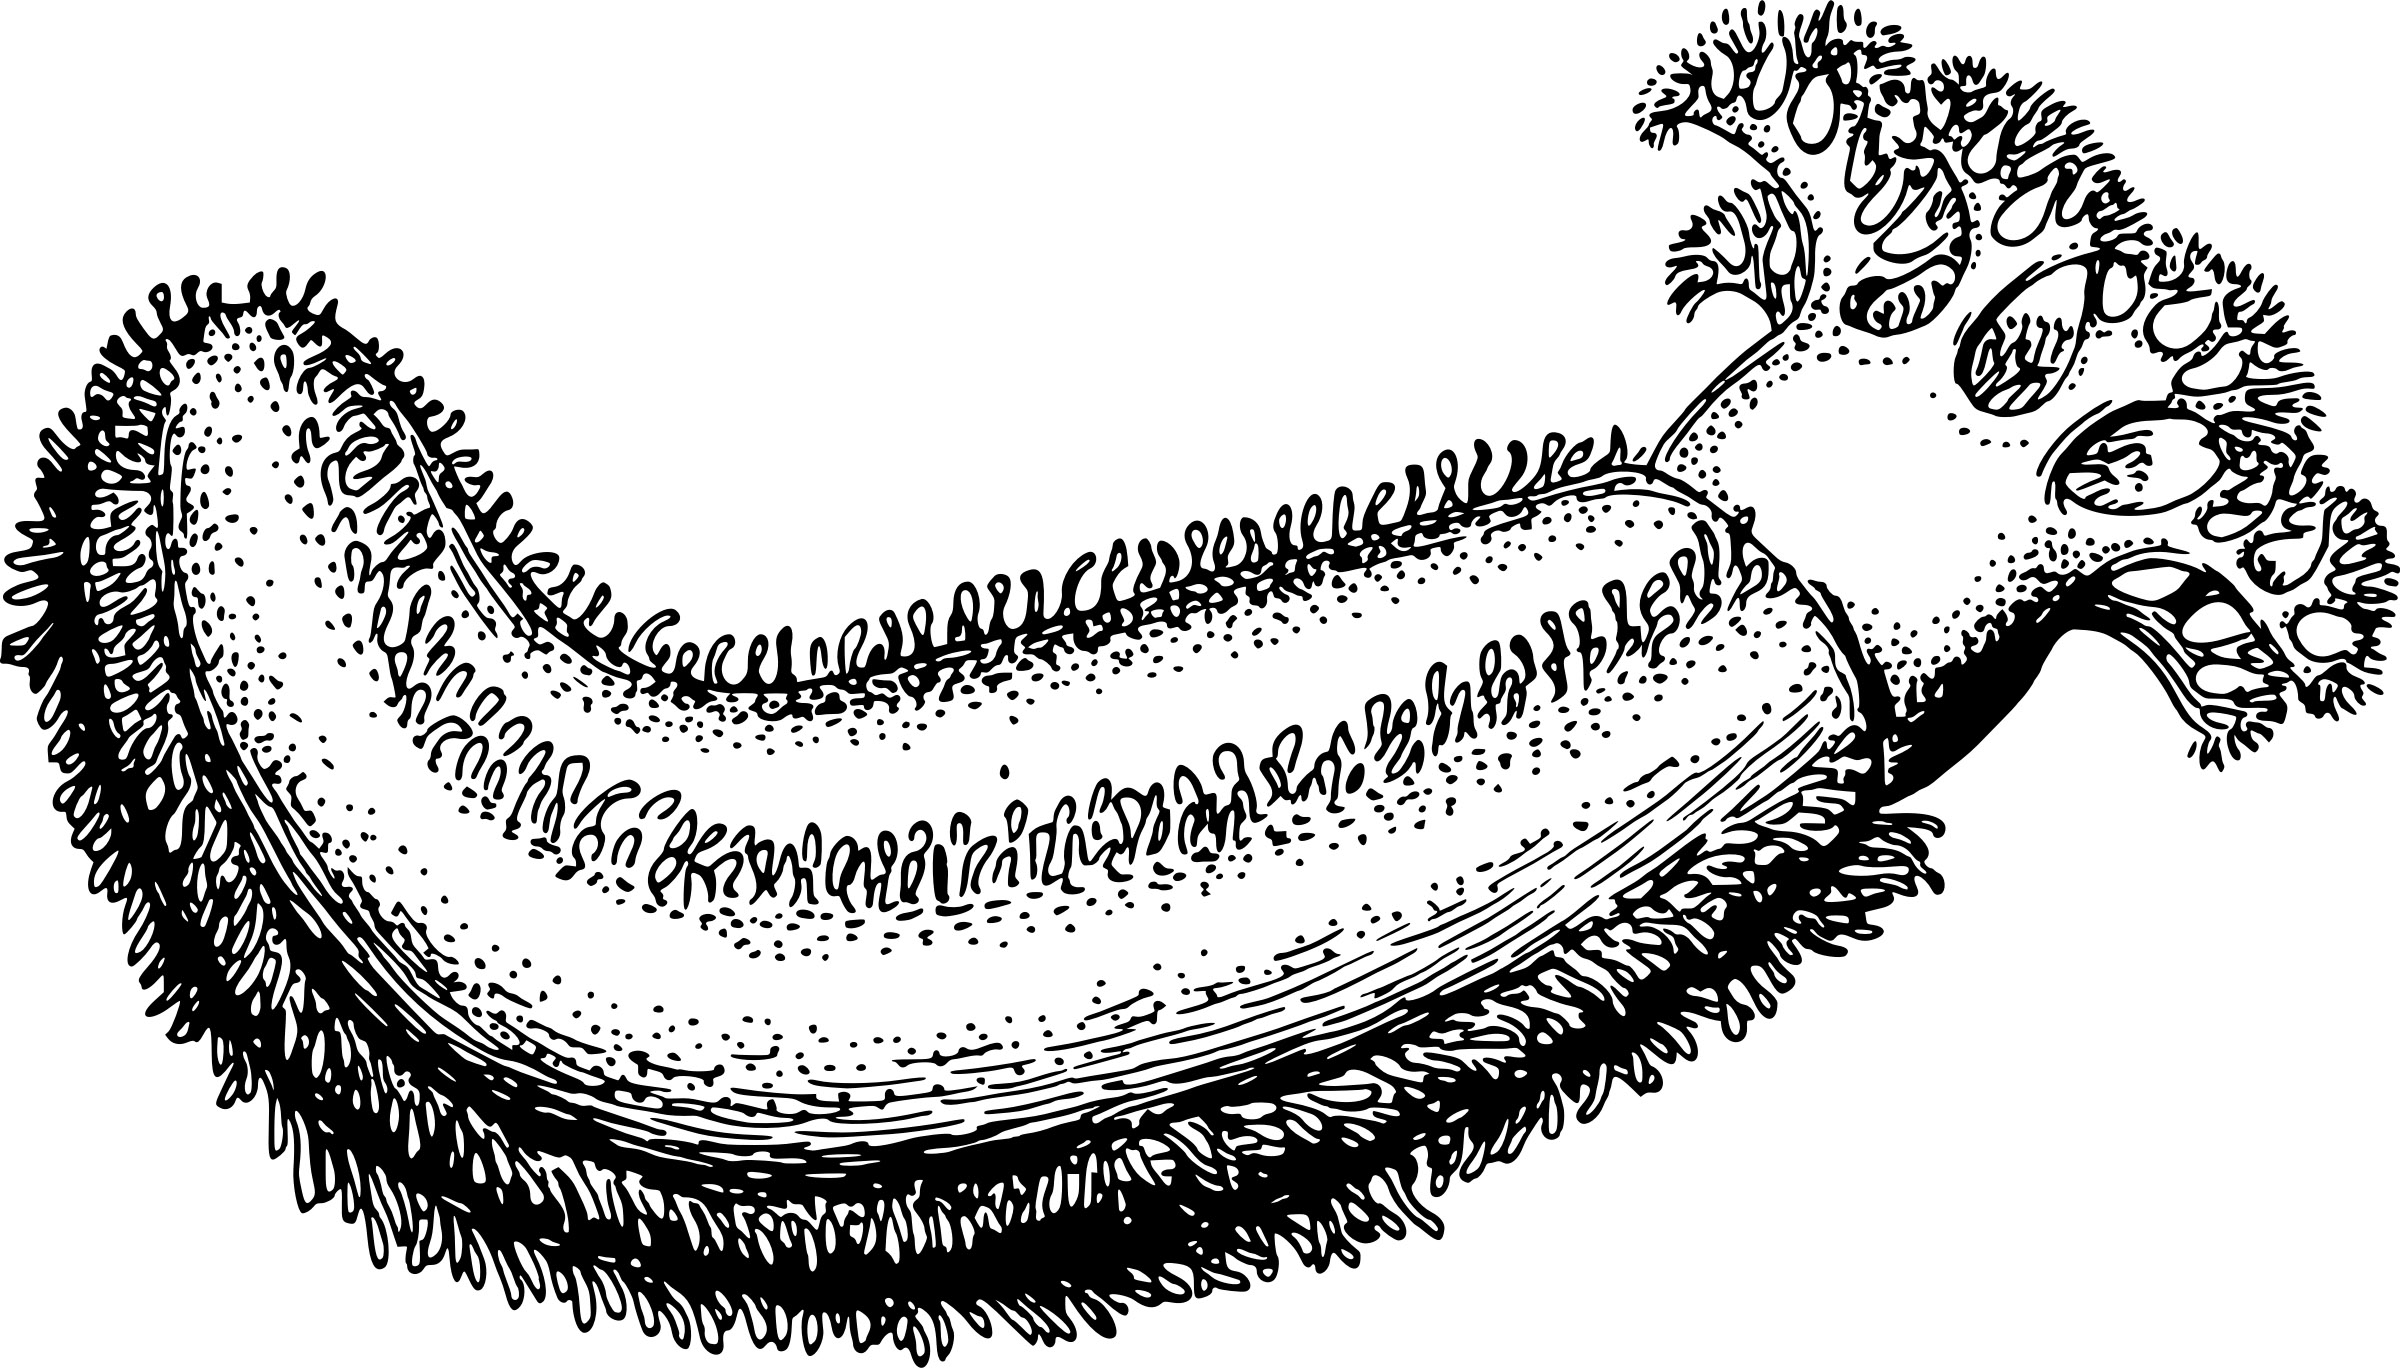 How To Draw A Sea Cucumber